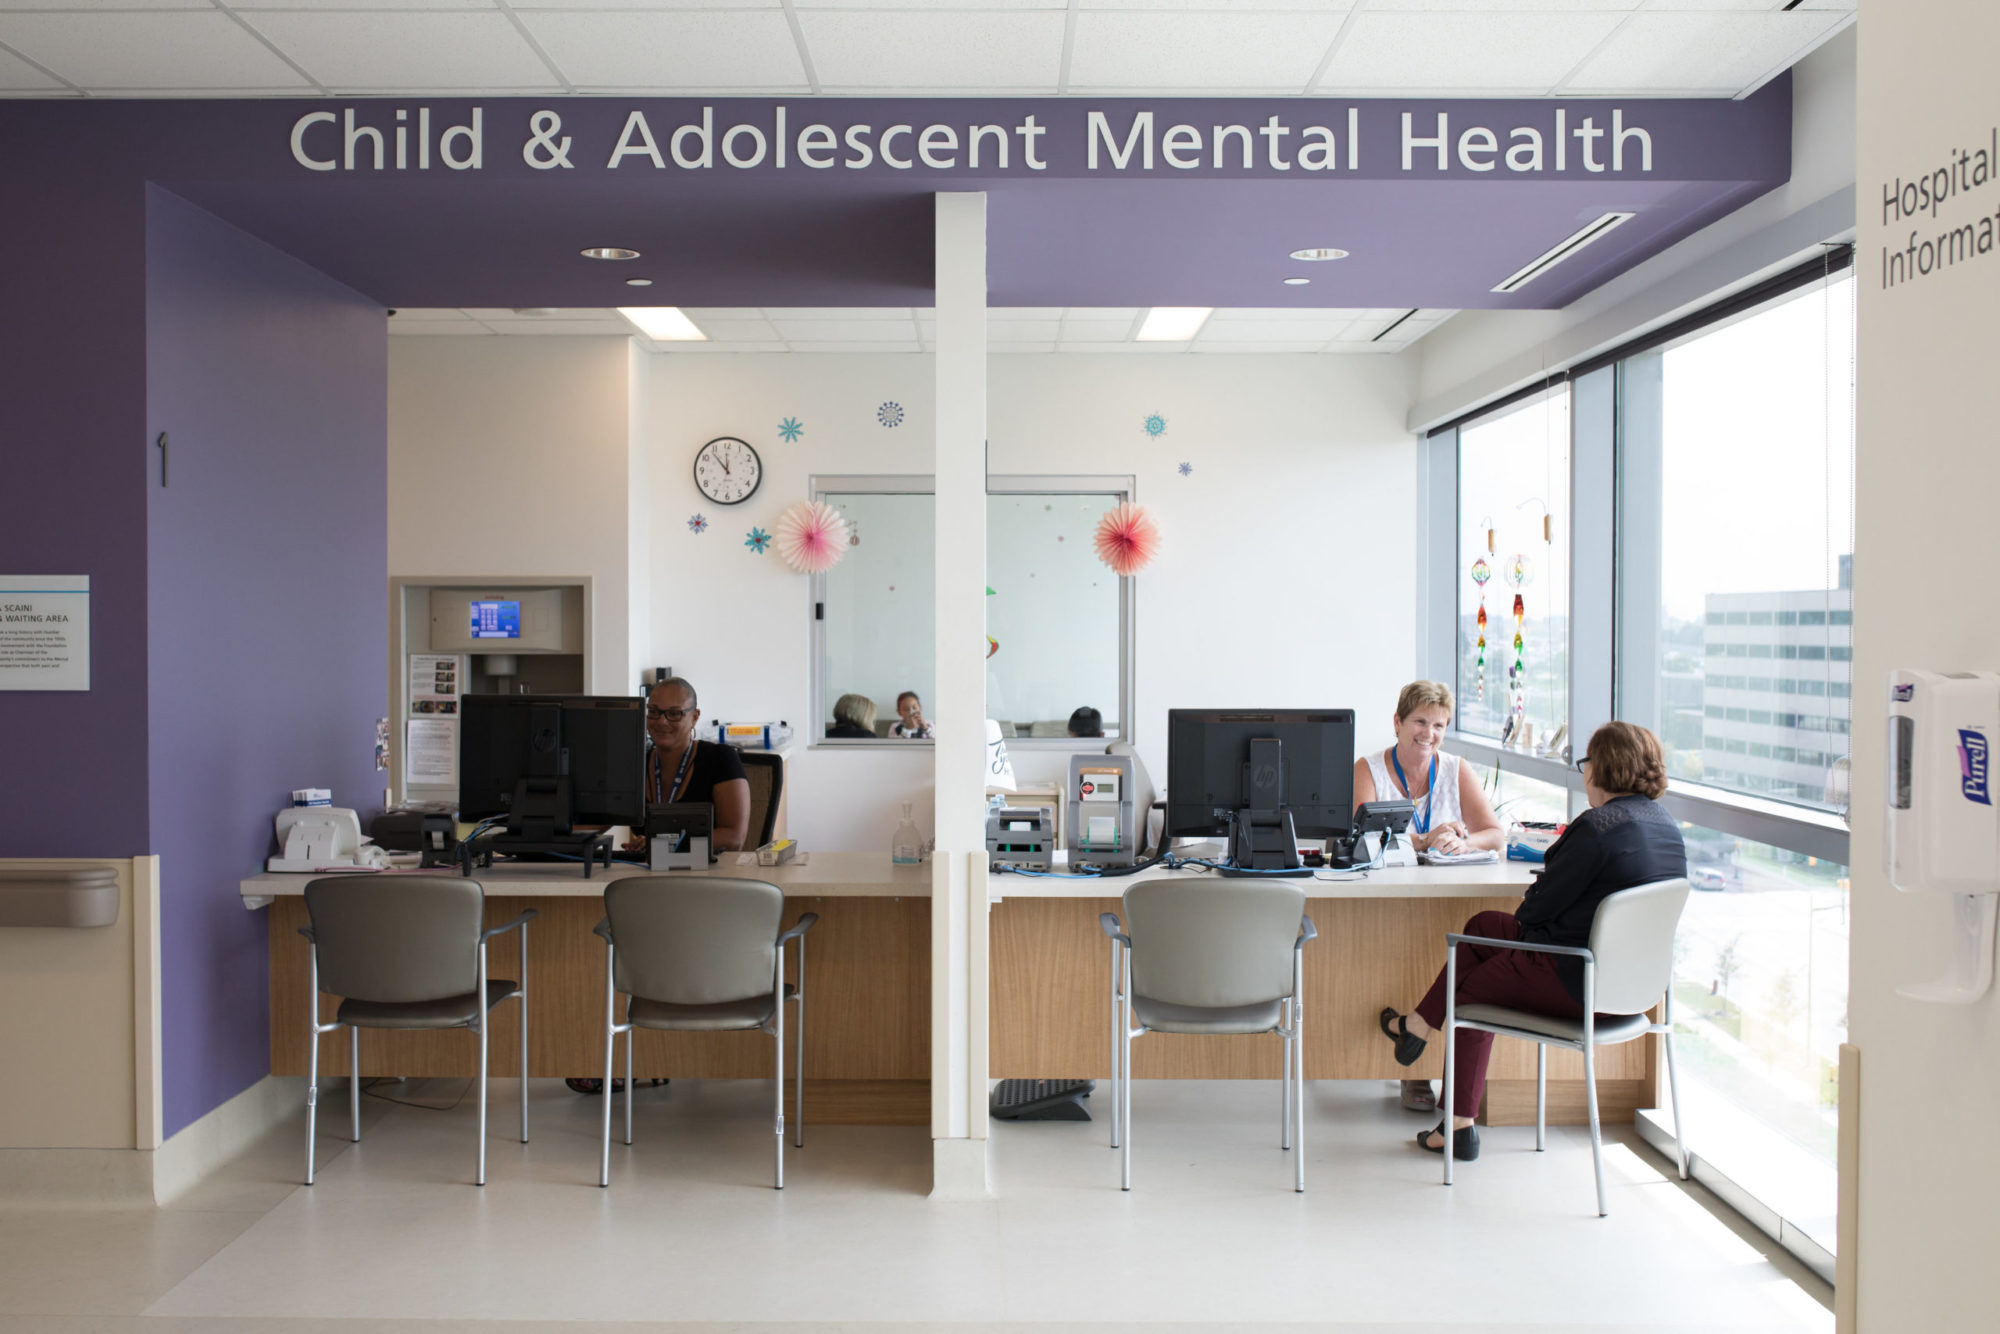 Child and Adolescent Mental Health Outpatient Lobby